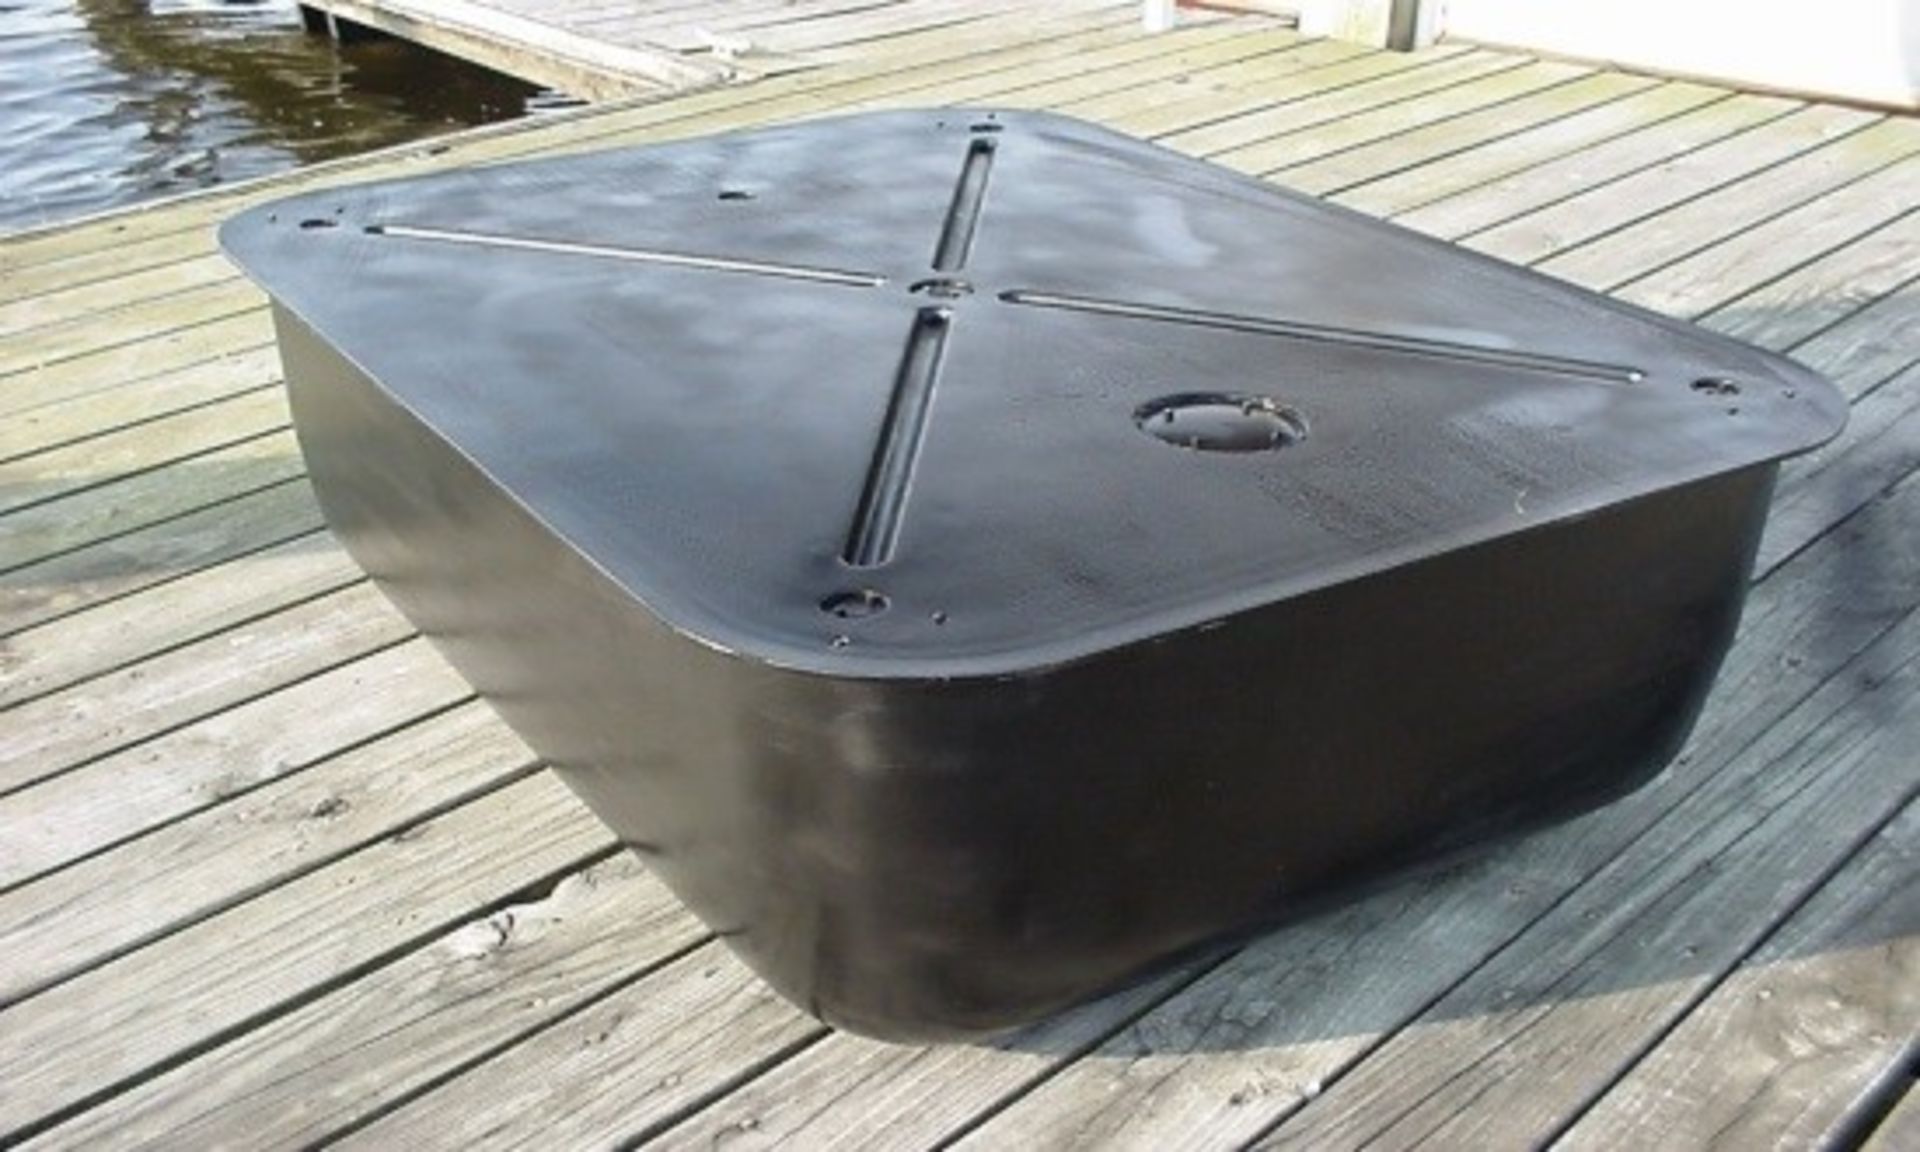 Dock Float Business - PolyFlange dock floats come in 3 footprints: 2'x4', 3'x4', and 4'x4'. Specific - Image 3 of 5